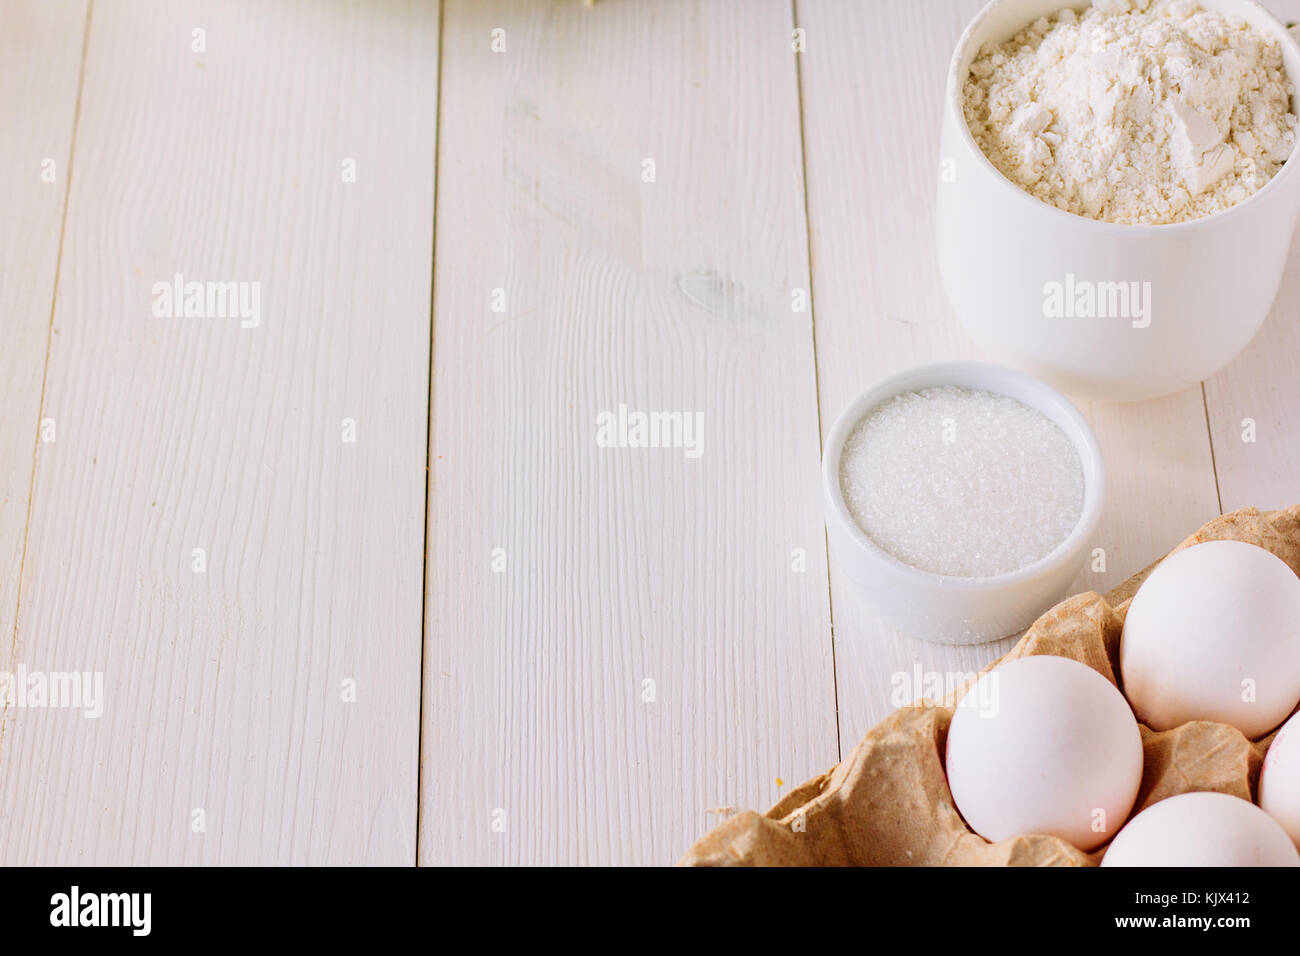 Eggs, flour and sugar on wooden table copy space selective focus Stock Photo